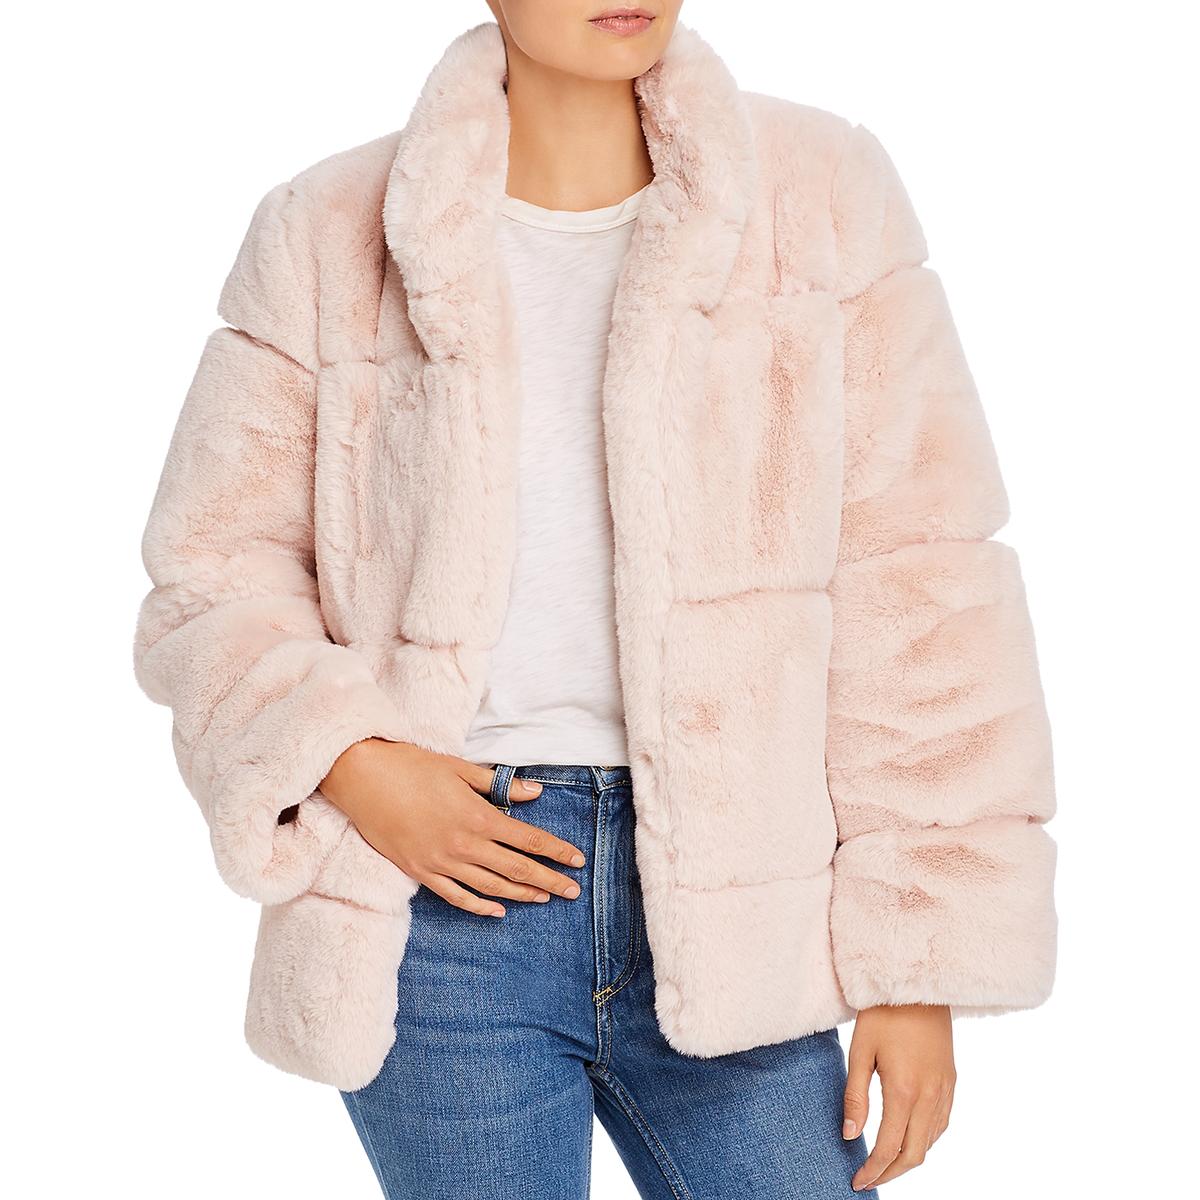 Apparis Womens Sarah Pink Winter Faux Fur Grooved Coat Outerwear S BHFO ...